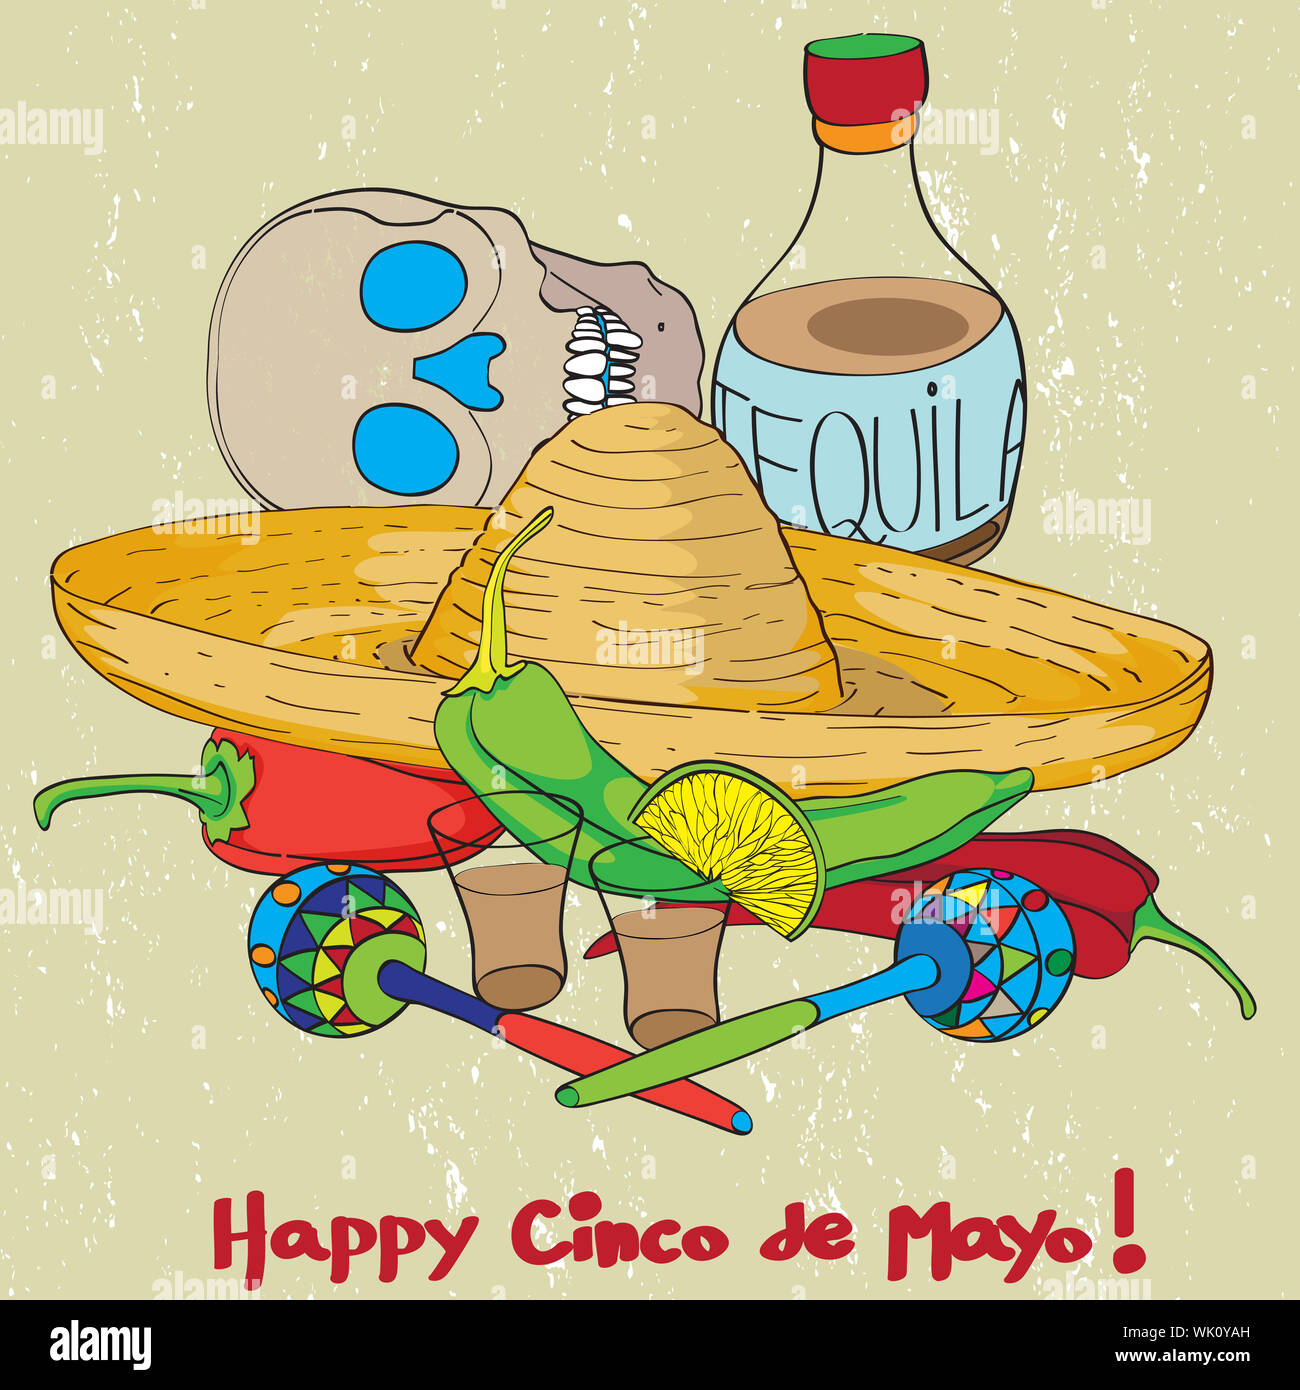 Cinco de mayo hand drawn cartoon illustration of a greeting card composition with mexican traditional elements oven a grungy background Stock Photo